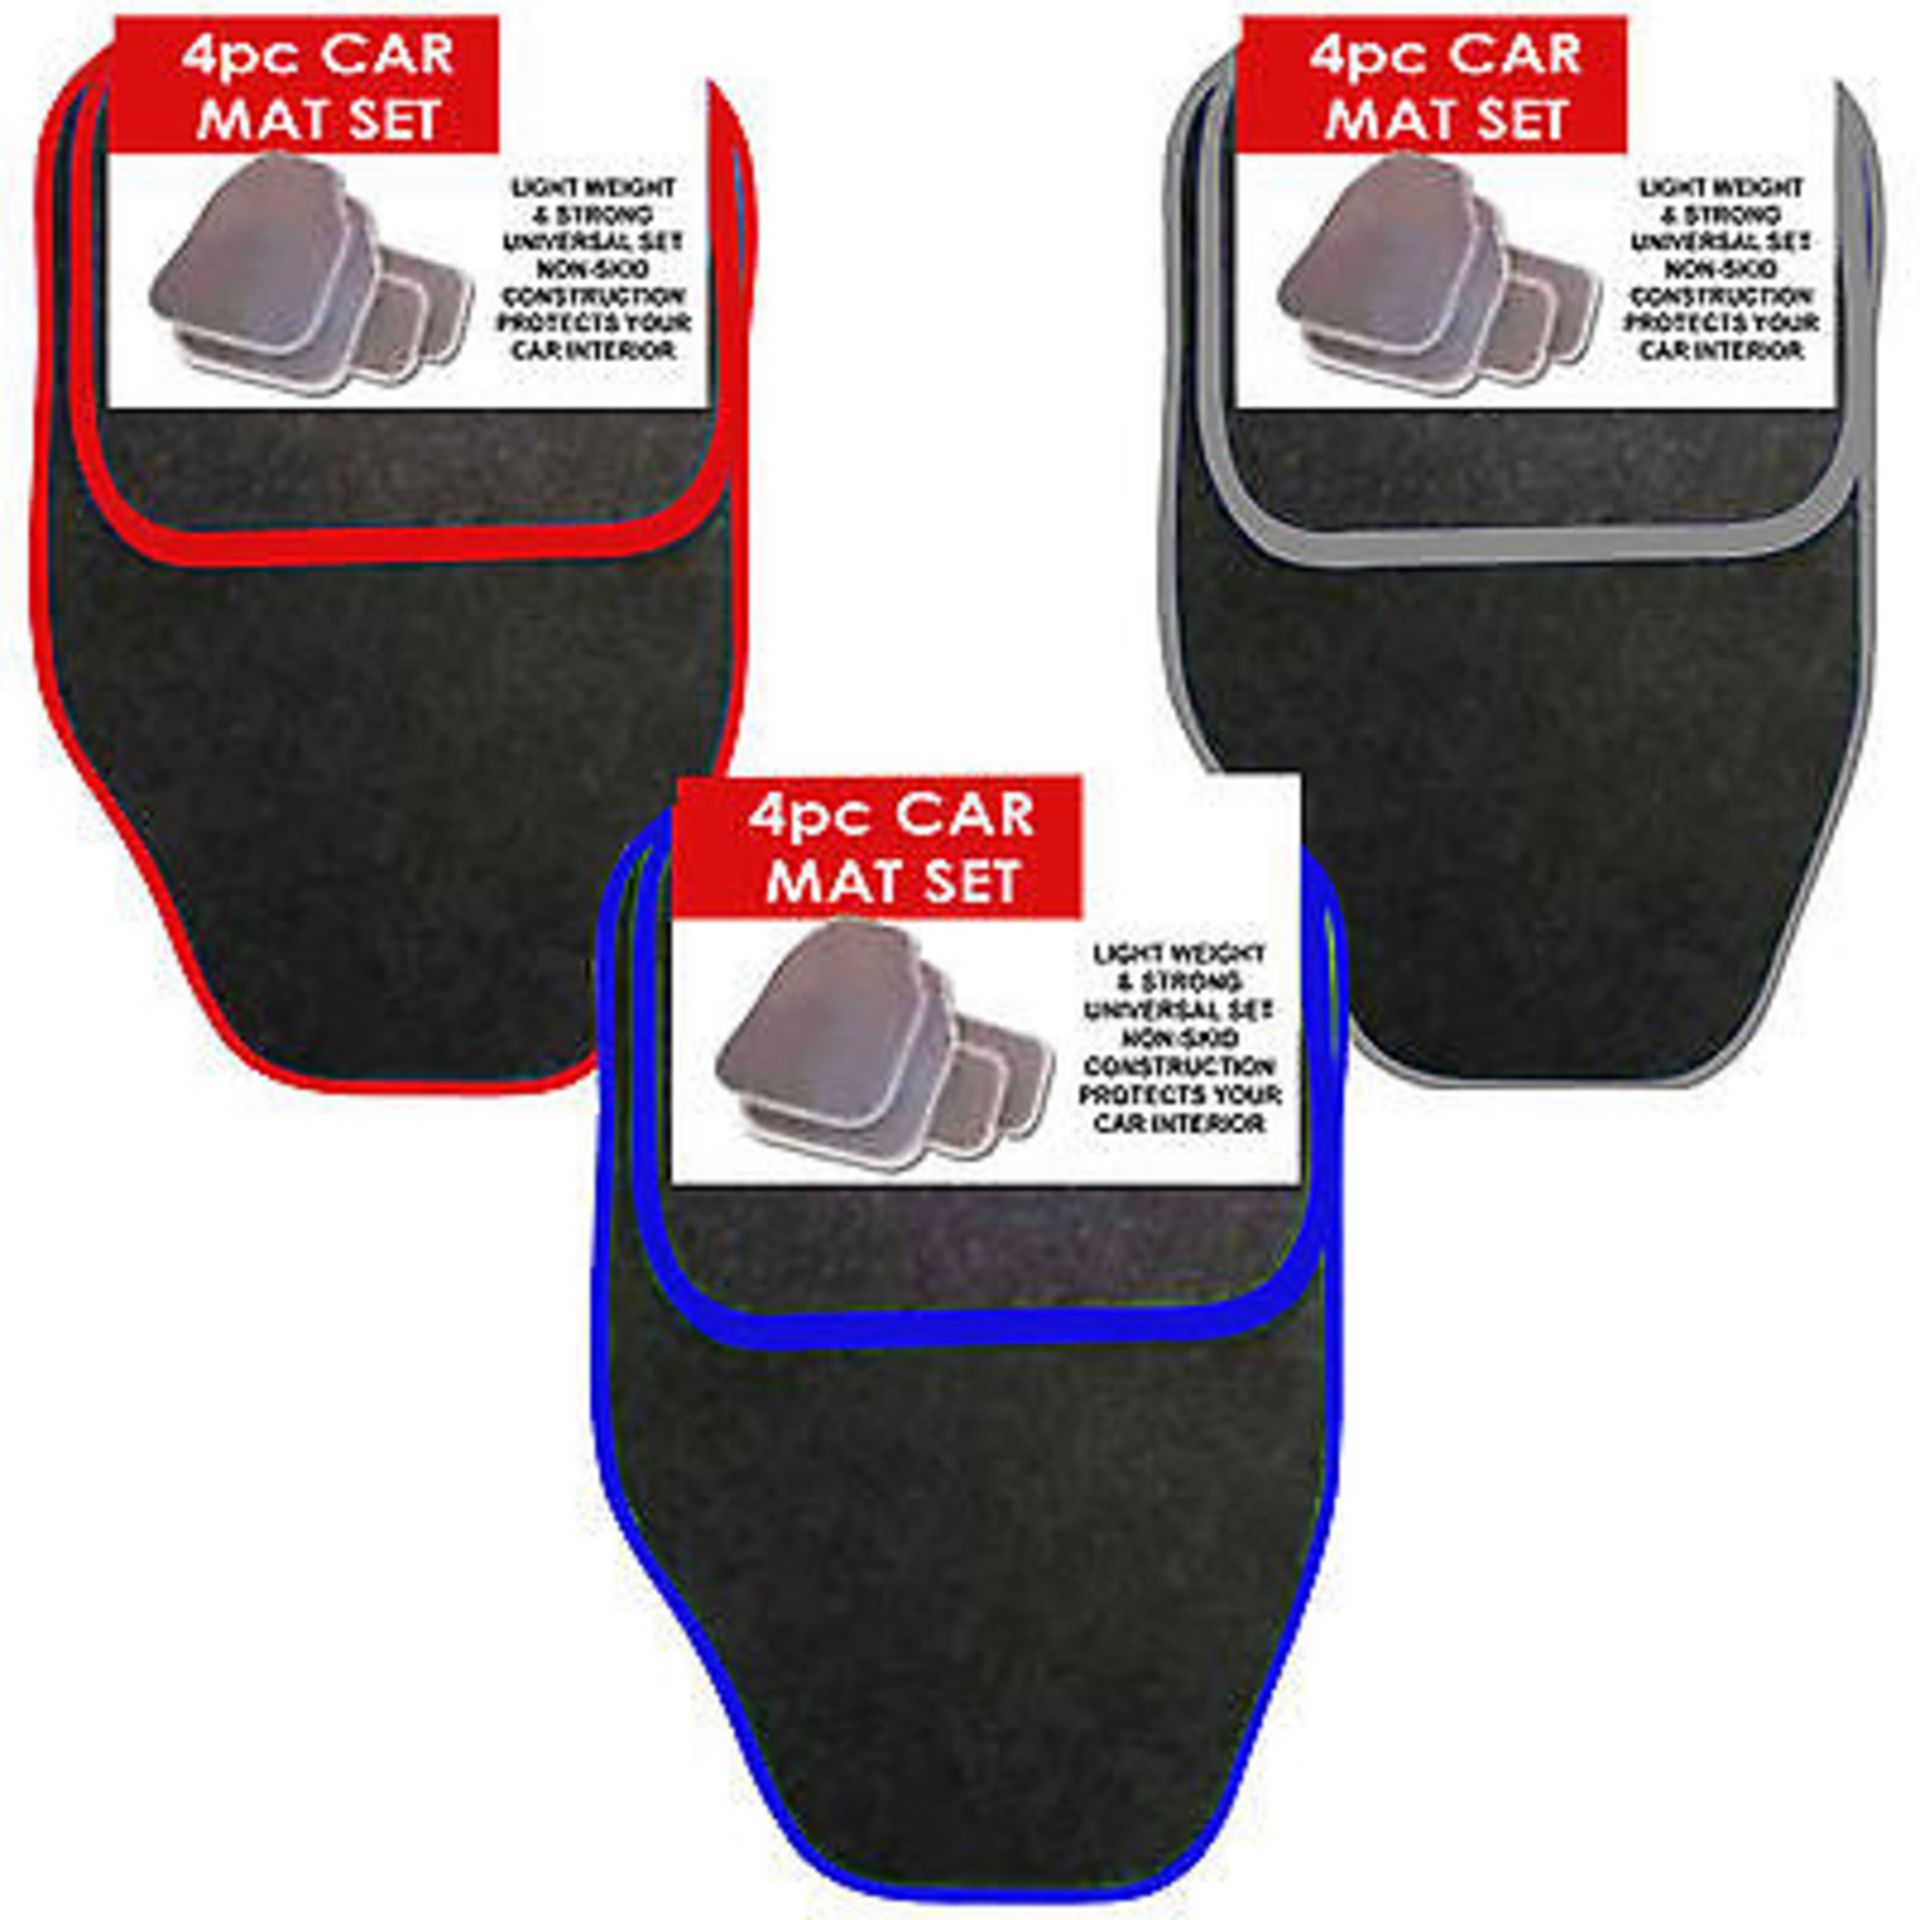 V Brand New Roadster Four Piece Car Mat Set-Lightweight-Non Skid Construction-Protects Your Car